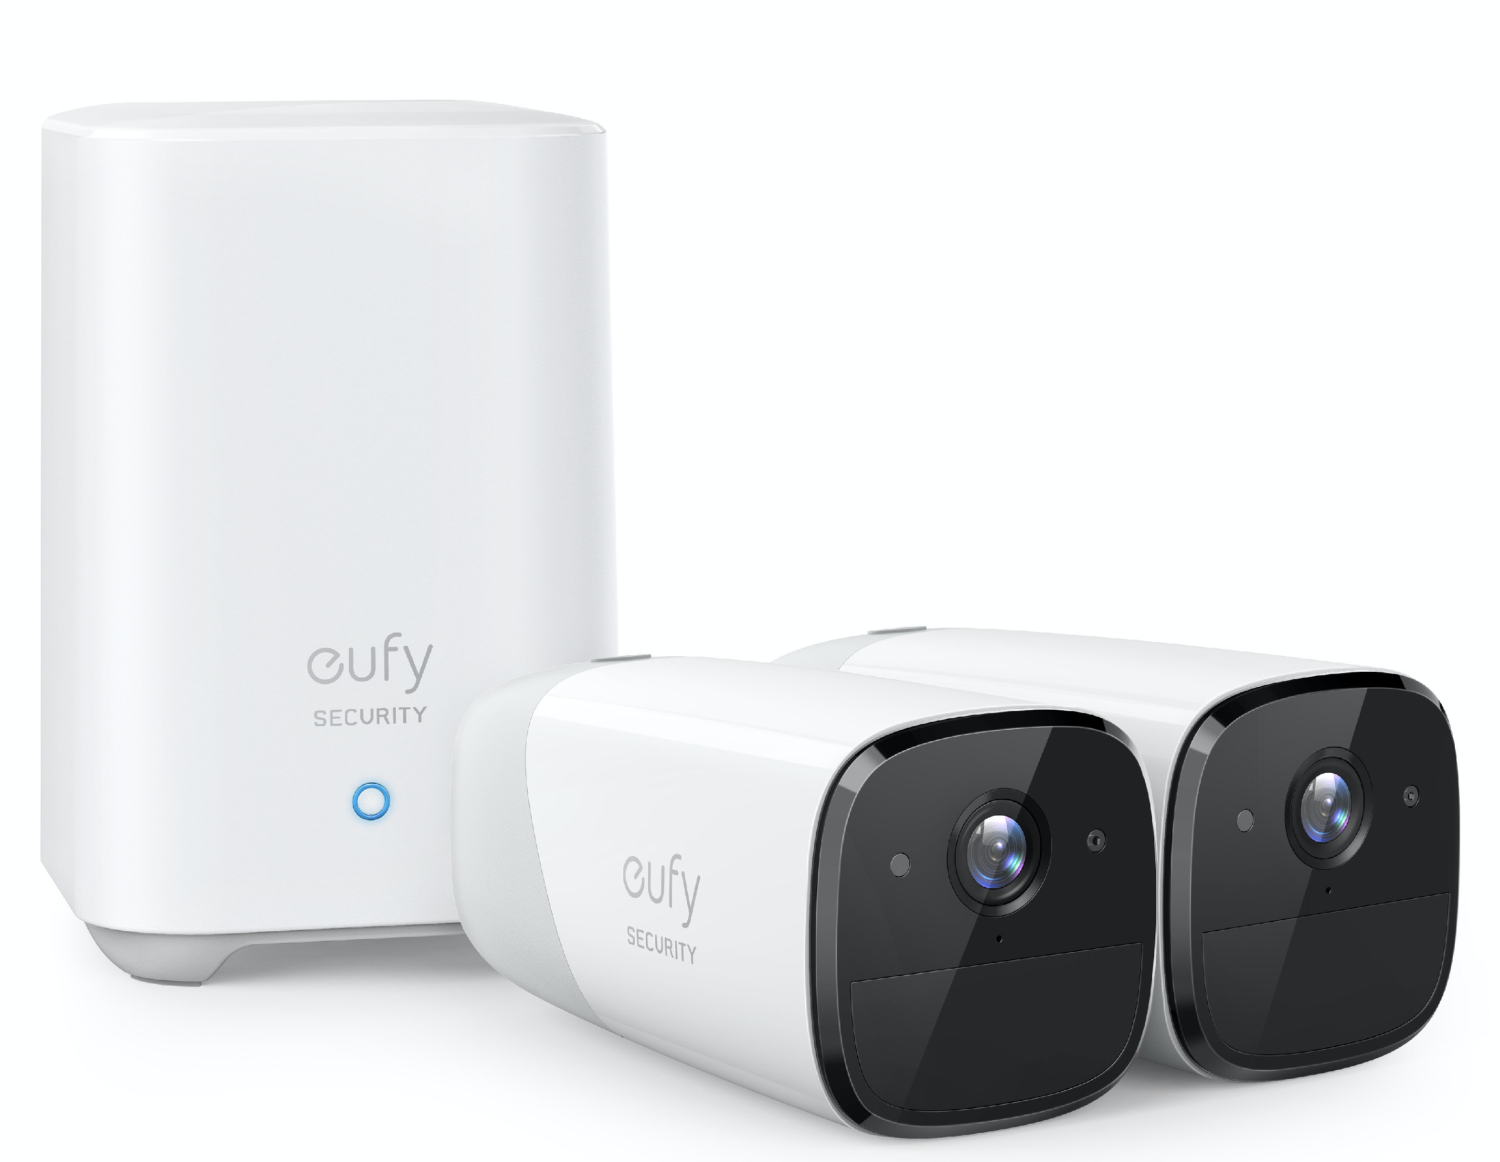 Anker launches new 2K security camera: the eufyCam 2 Pro